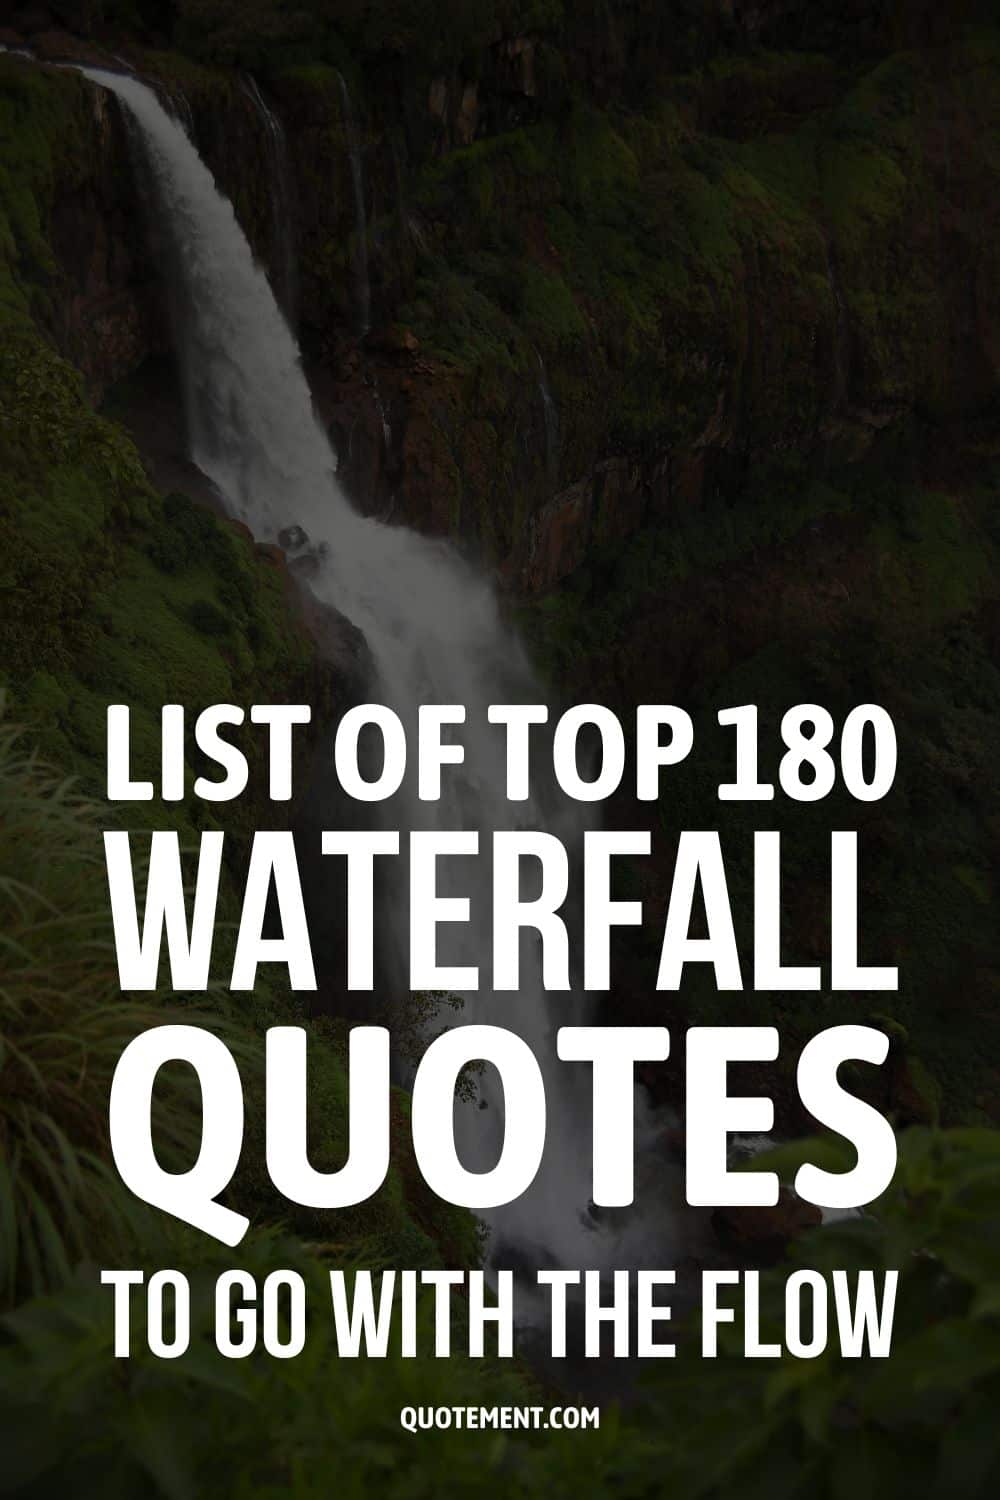 List Of Top 180 Waterfall Quotes To Go With The Flow
